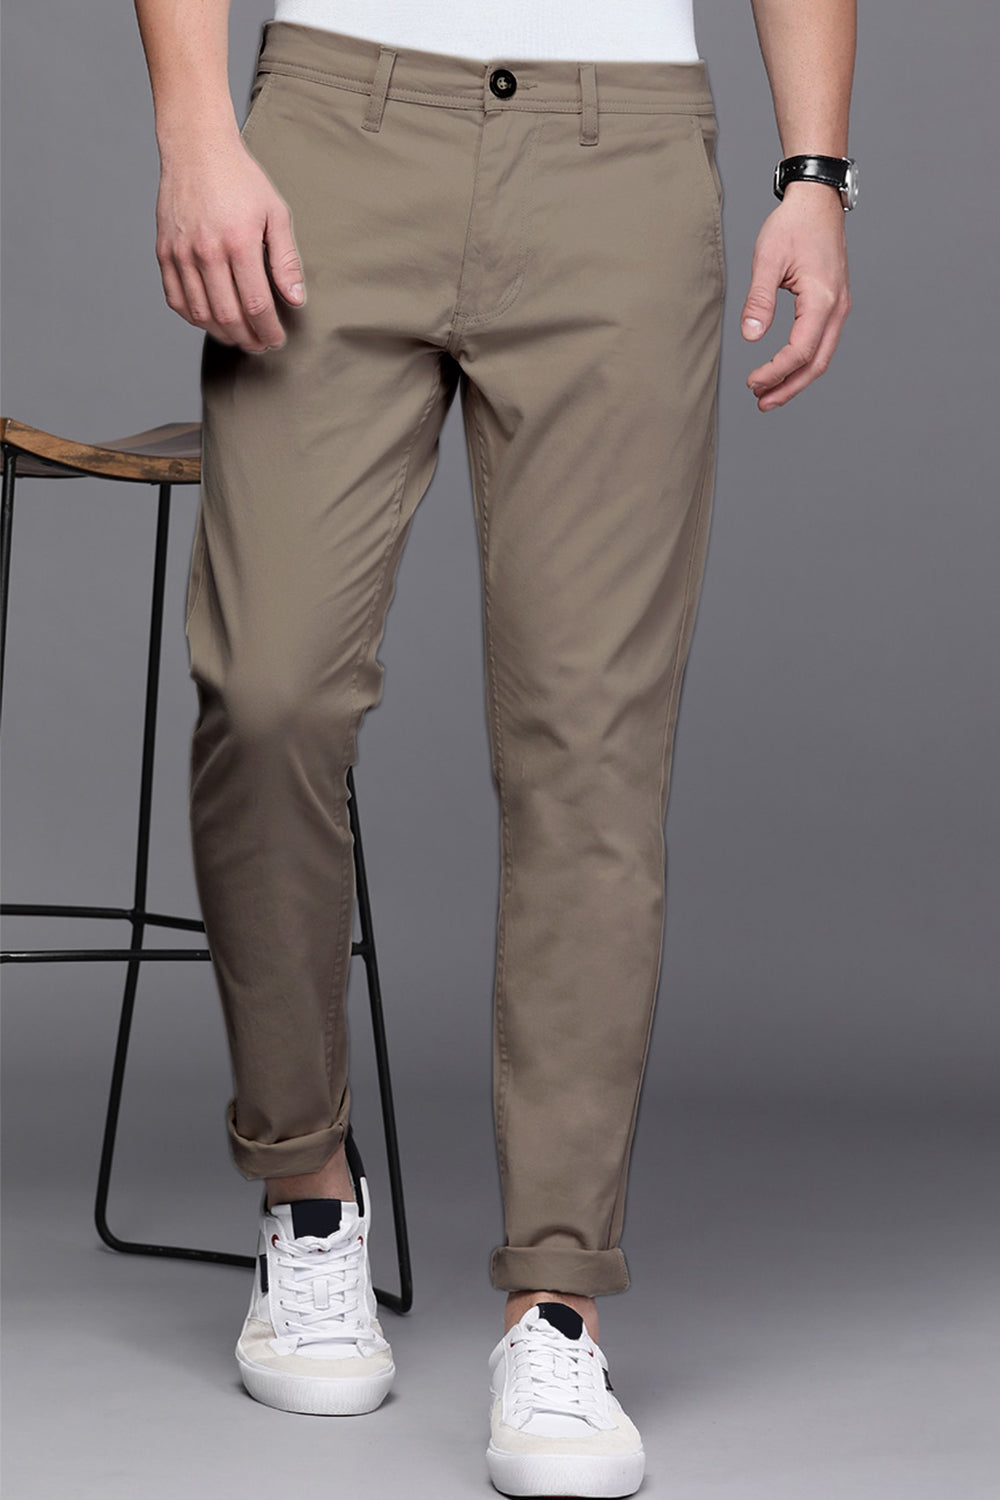 chinos pants for men